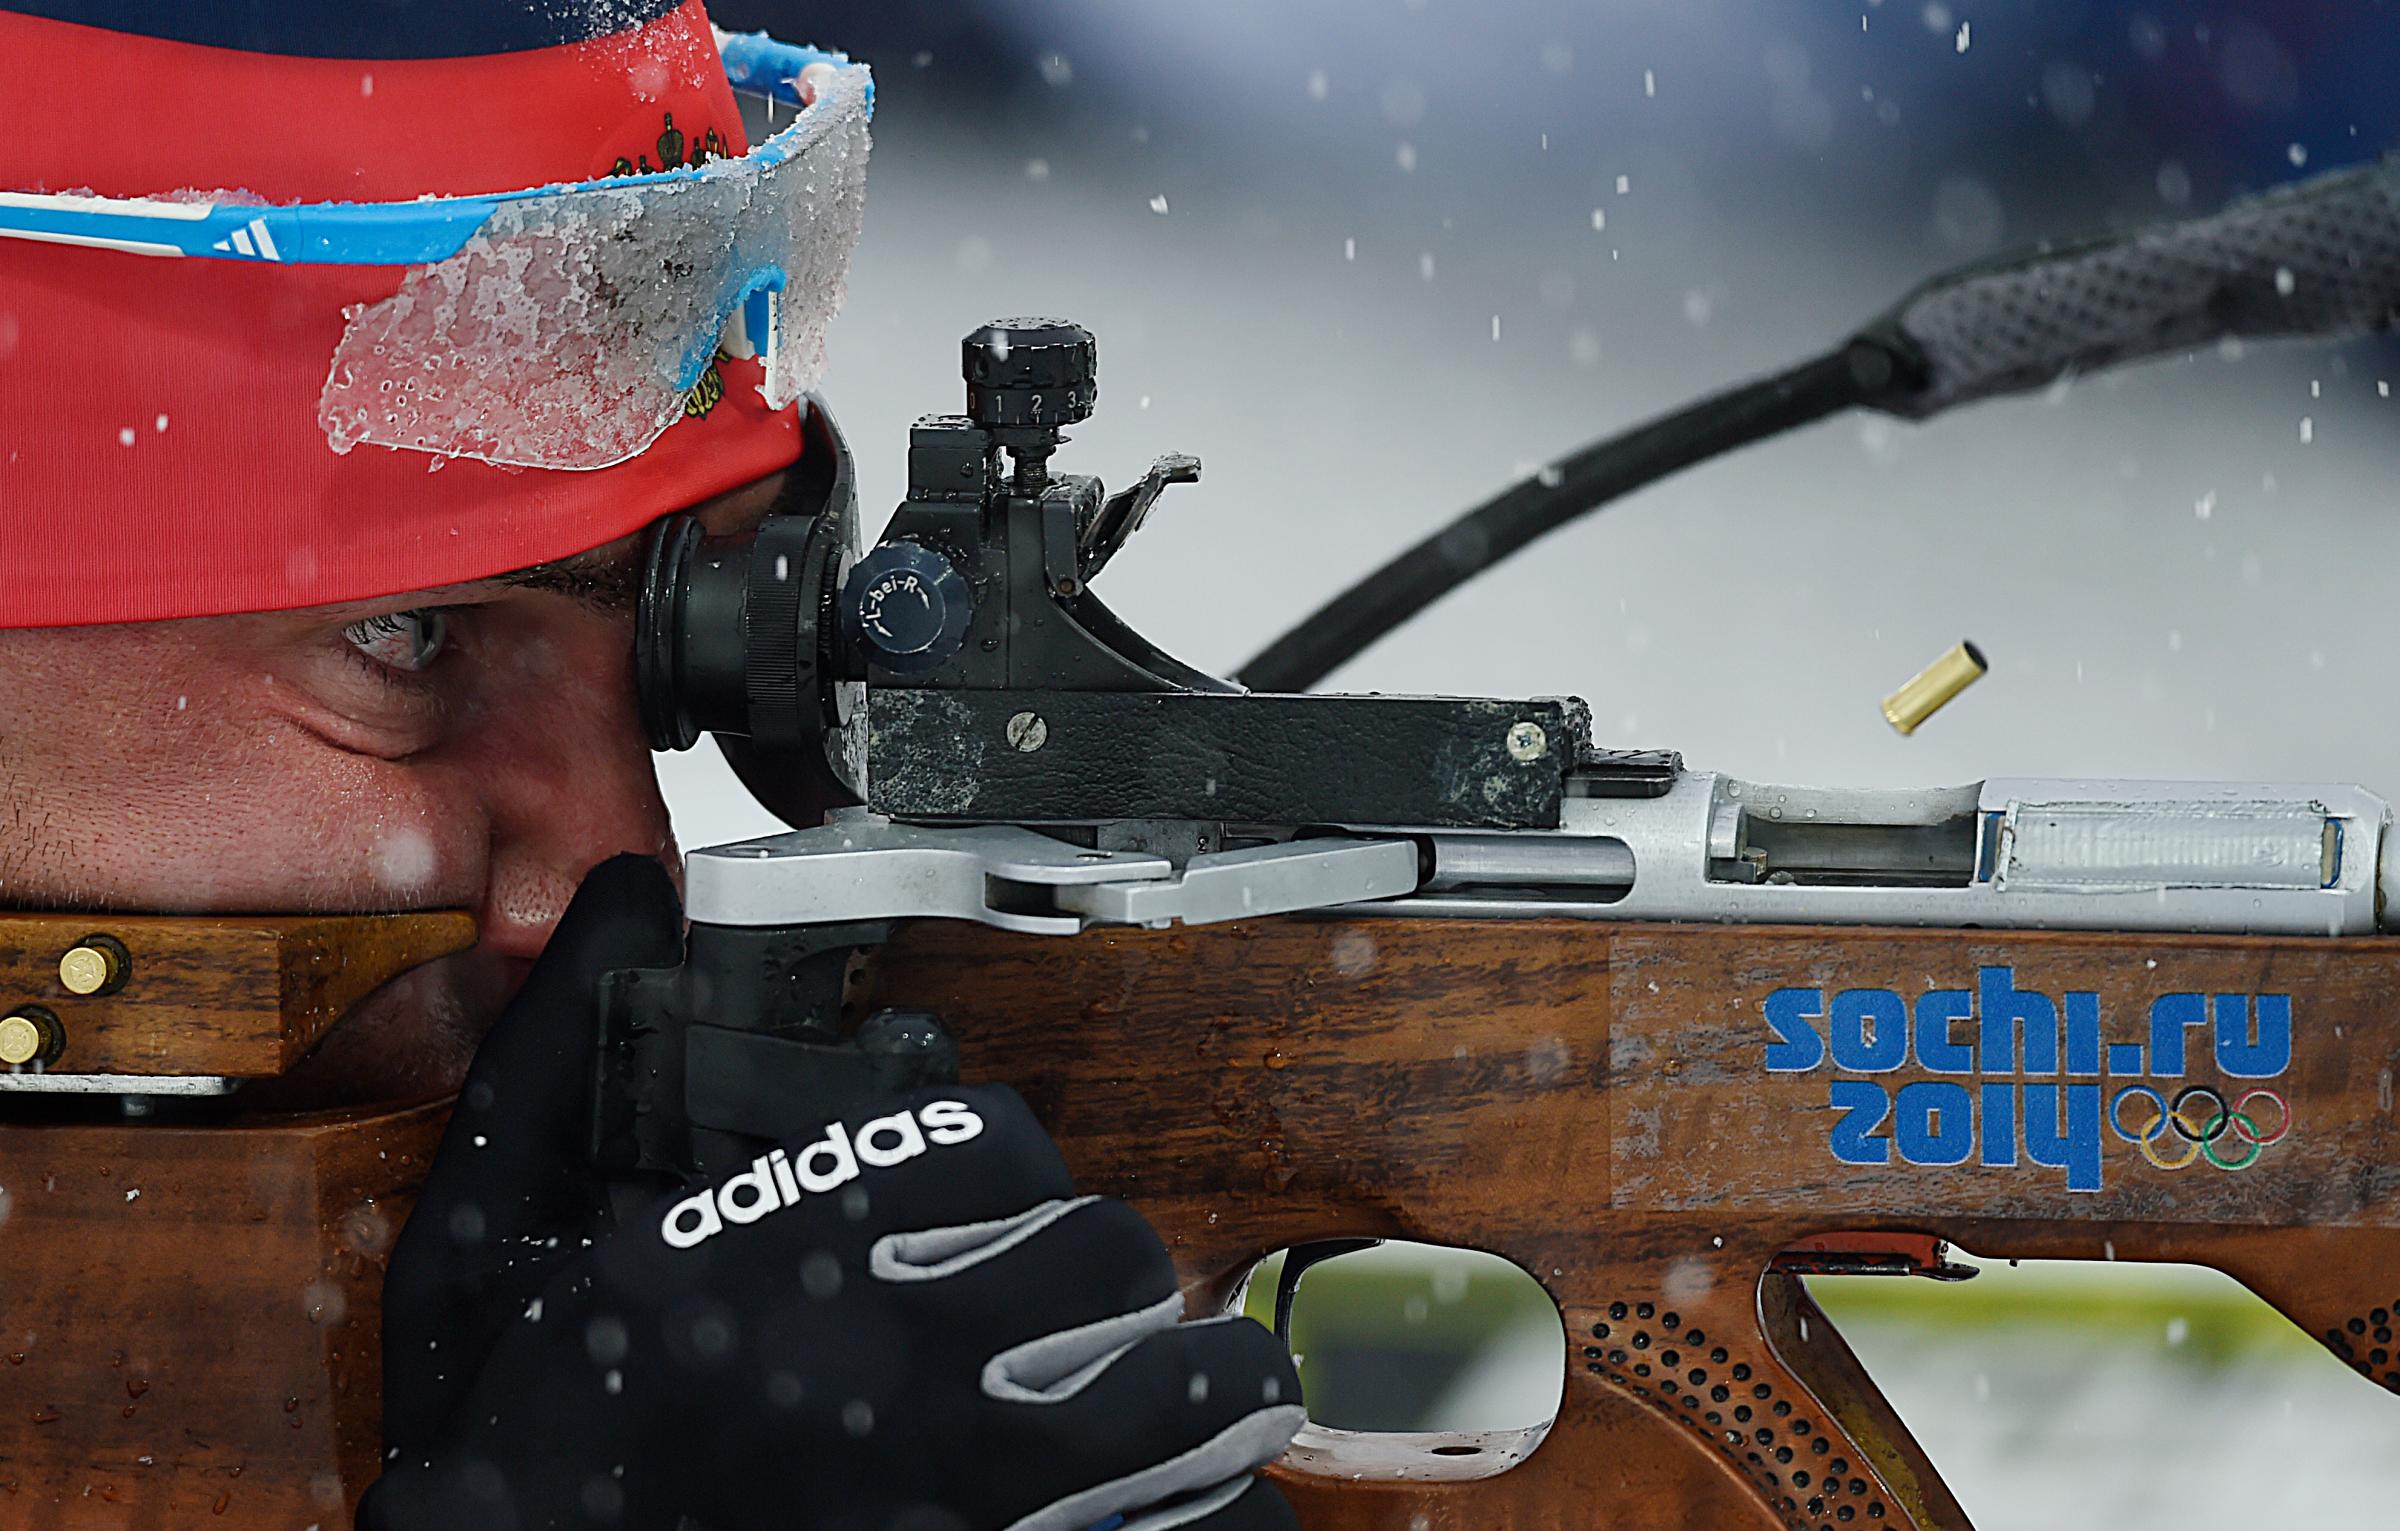 Evgeniy Garanichev of Russia in action during the men's 15km Mass Start competition at the Laura Cross Biathlon Center.